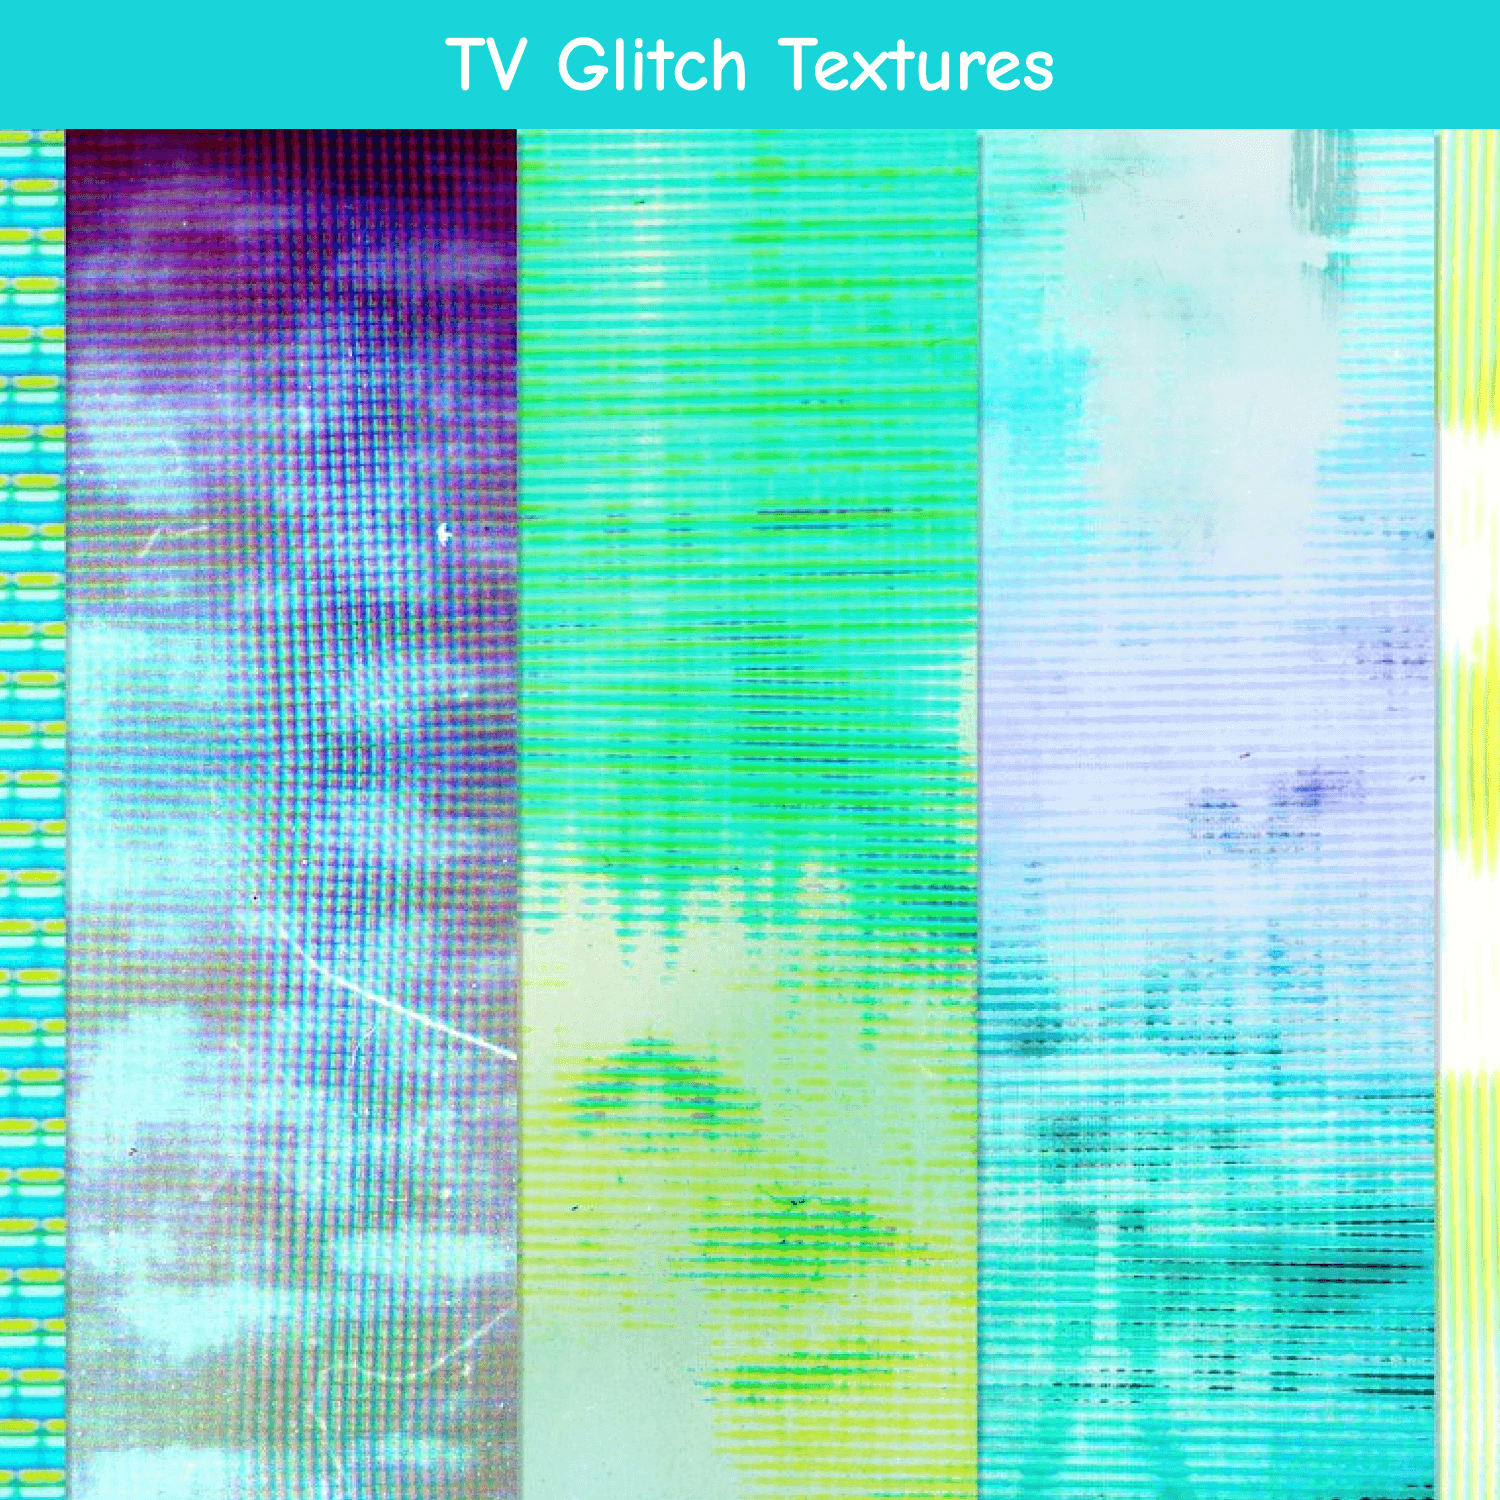 TV Glitch Textures with Green Color.